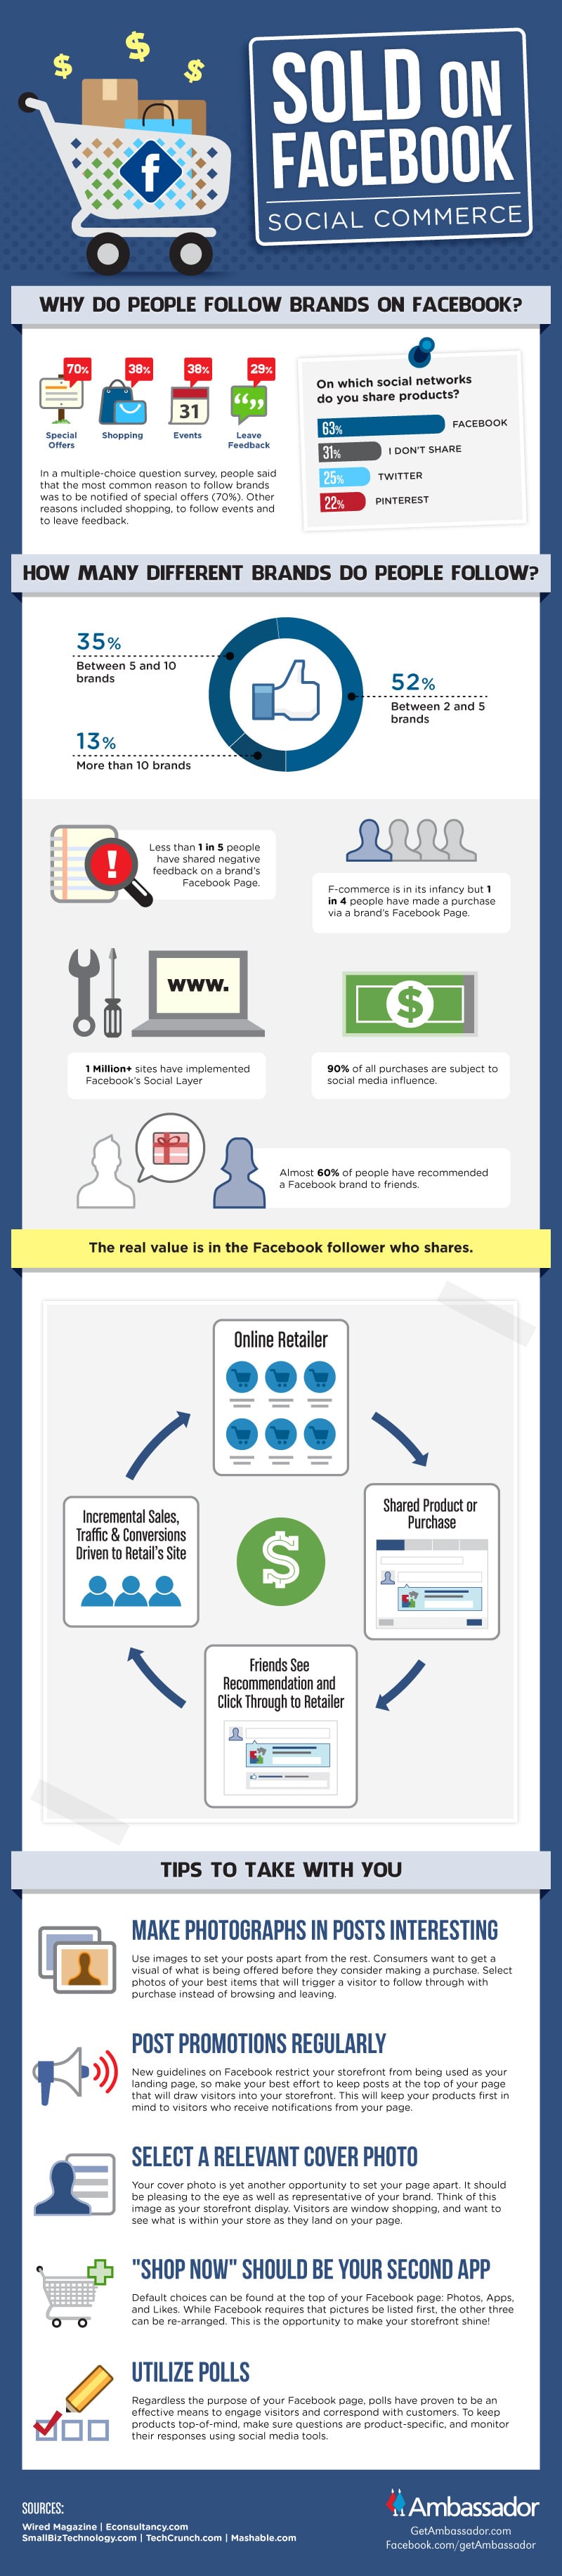 How Social Commerce Could Be A Business Booster [Infographic]